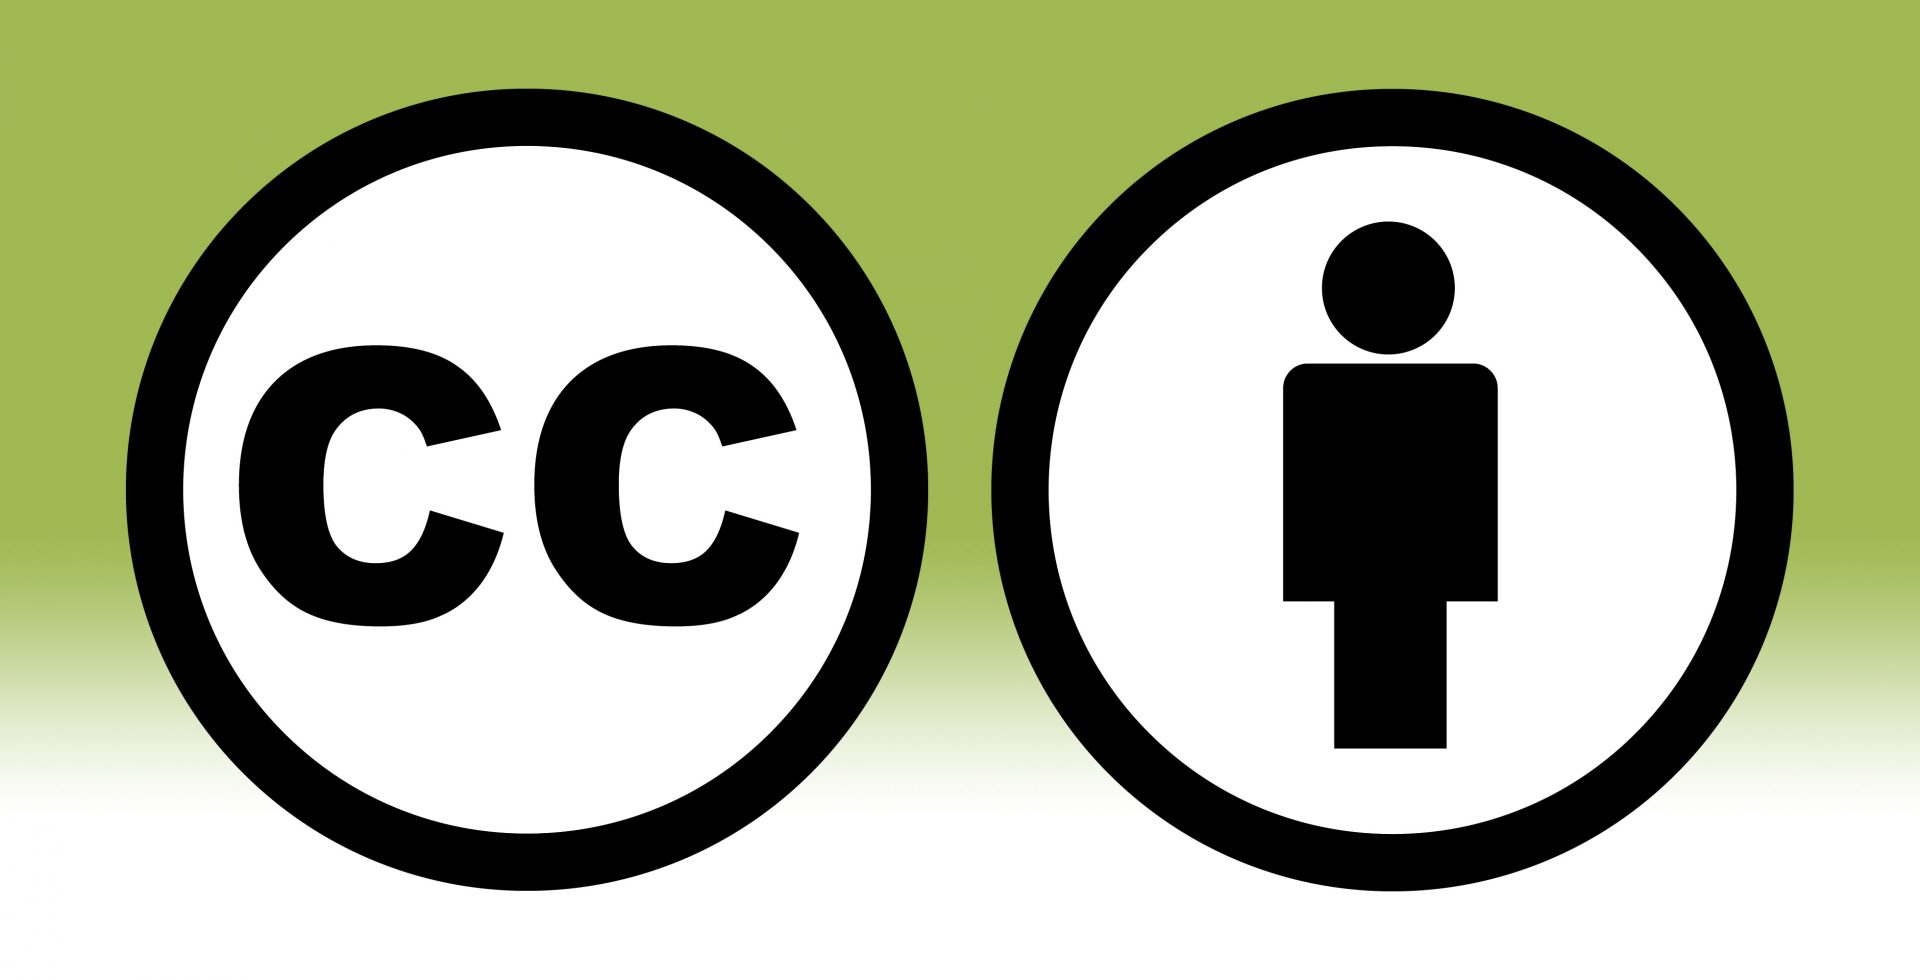 Creative commons attribution 4.0. Creative Commons Attribution 4.0 licence.